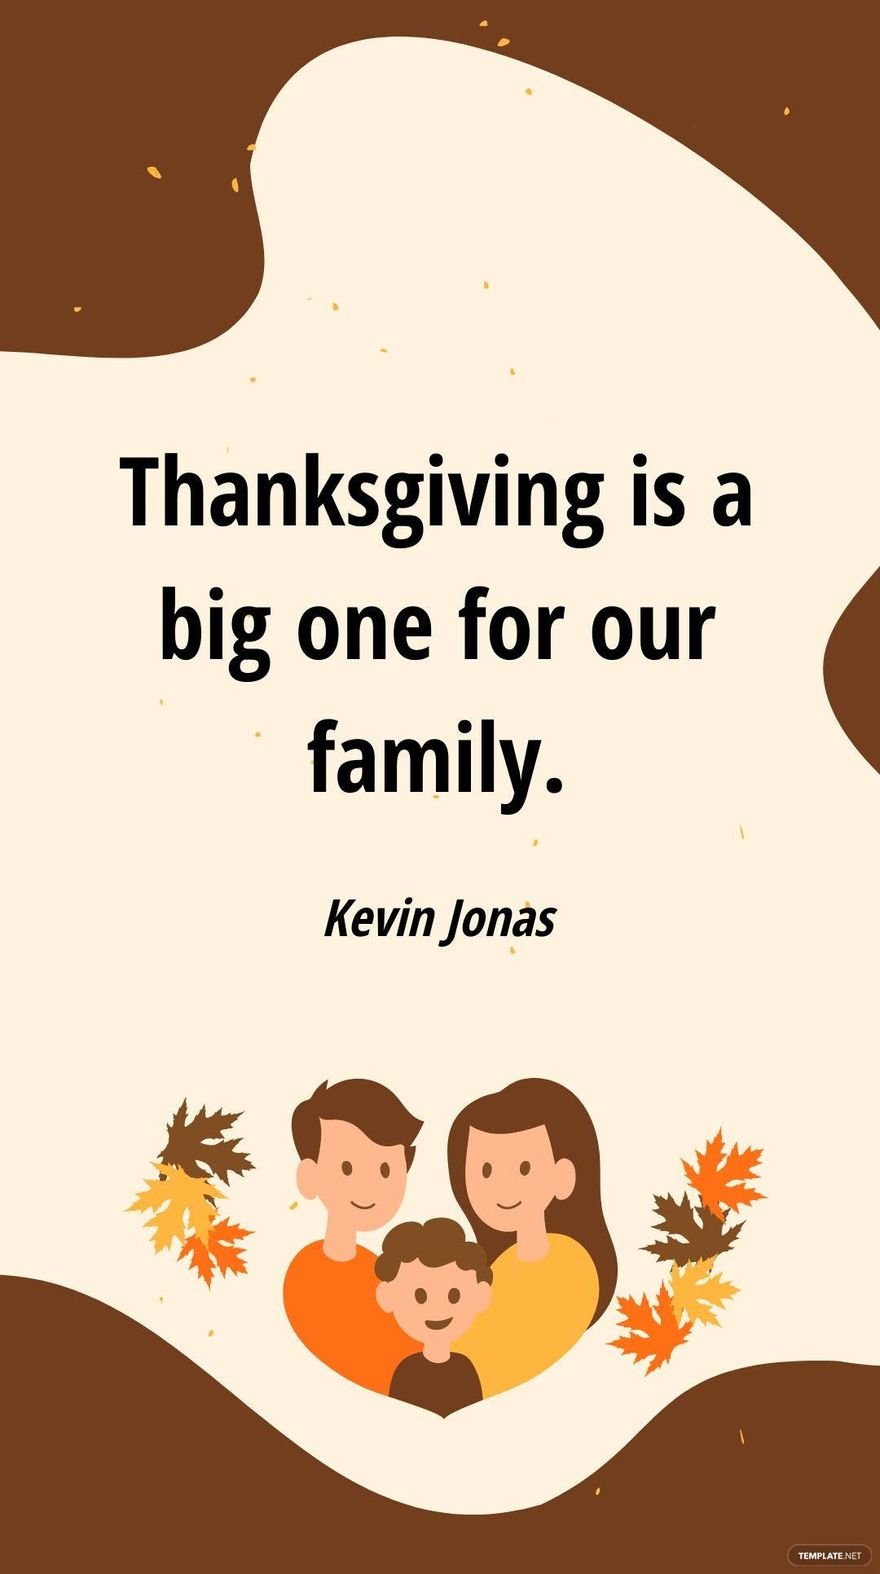 Free Kevin Jonas - Thanksgiving is a big one for our family.